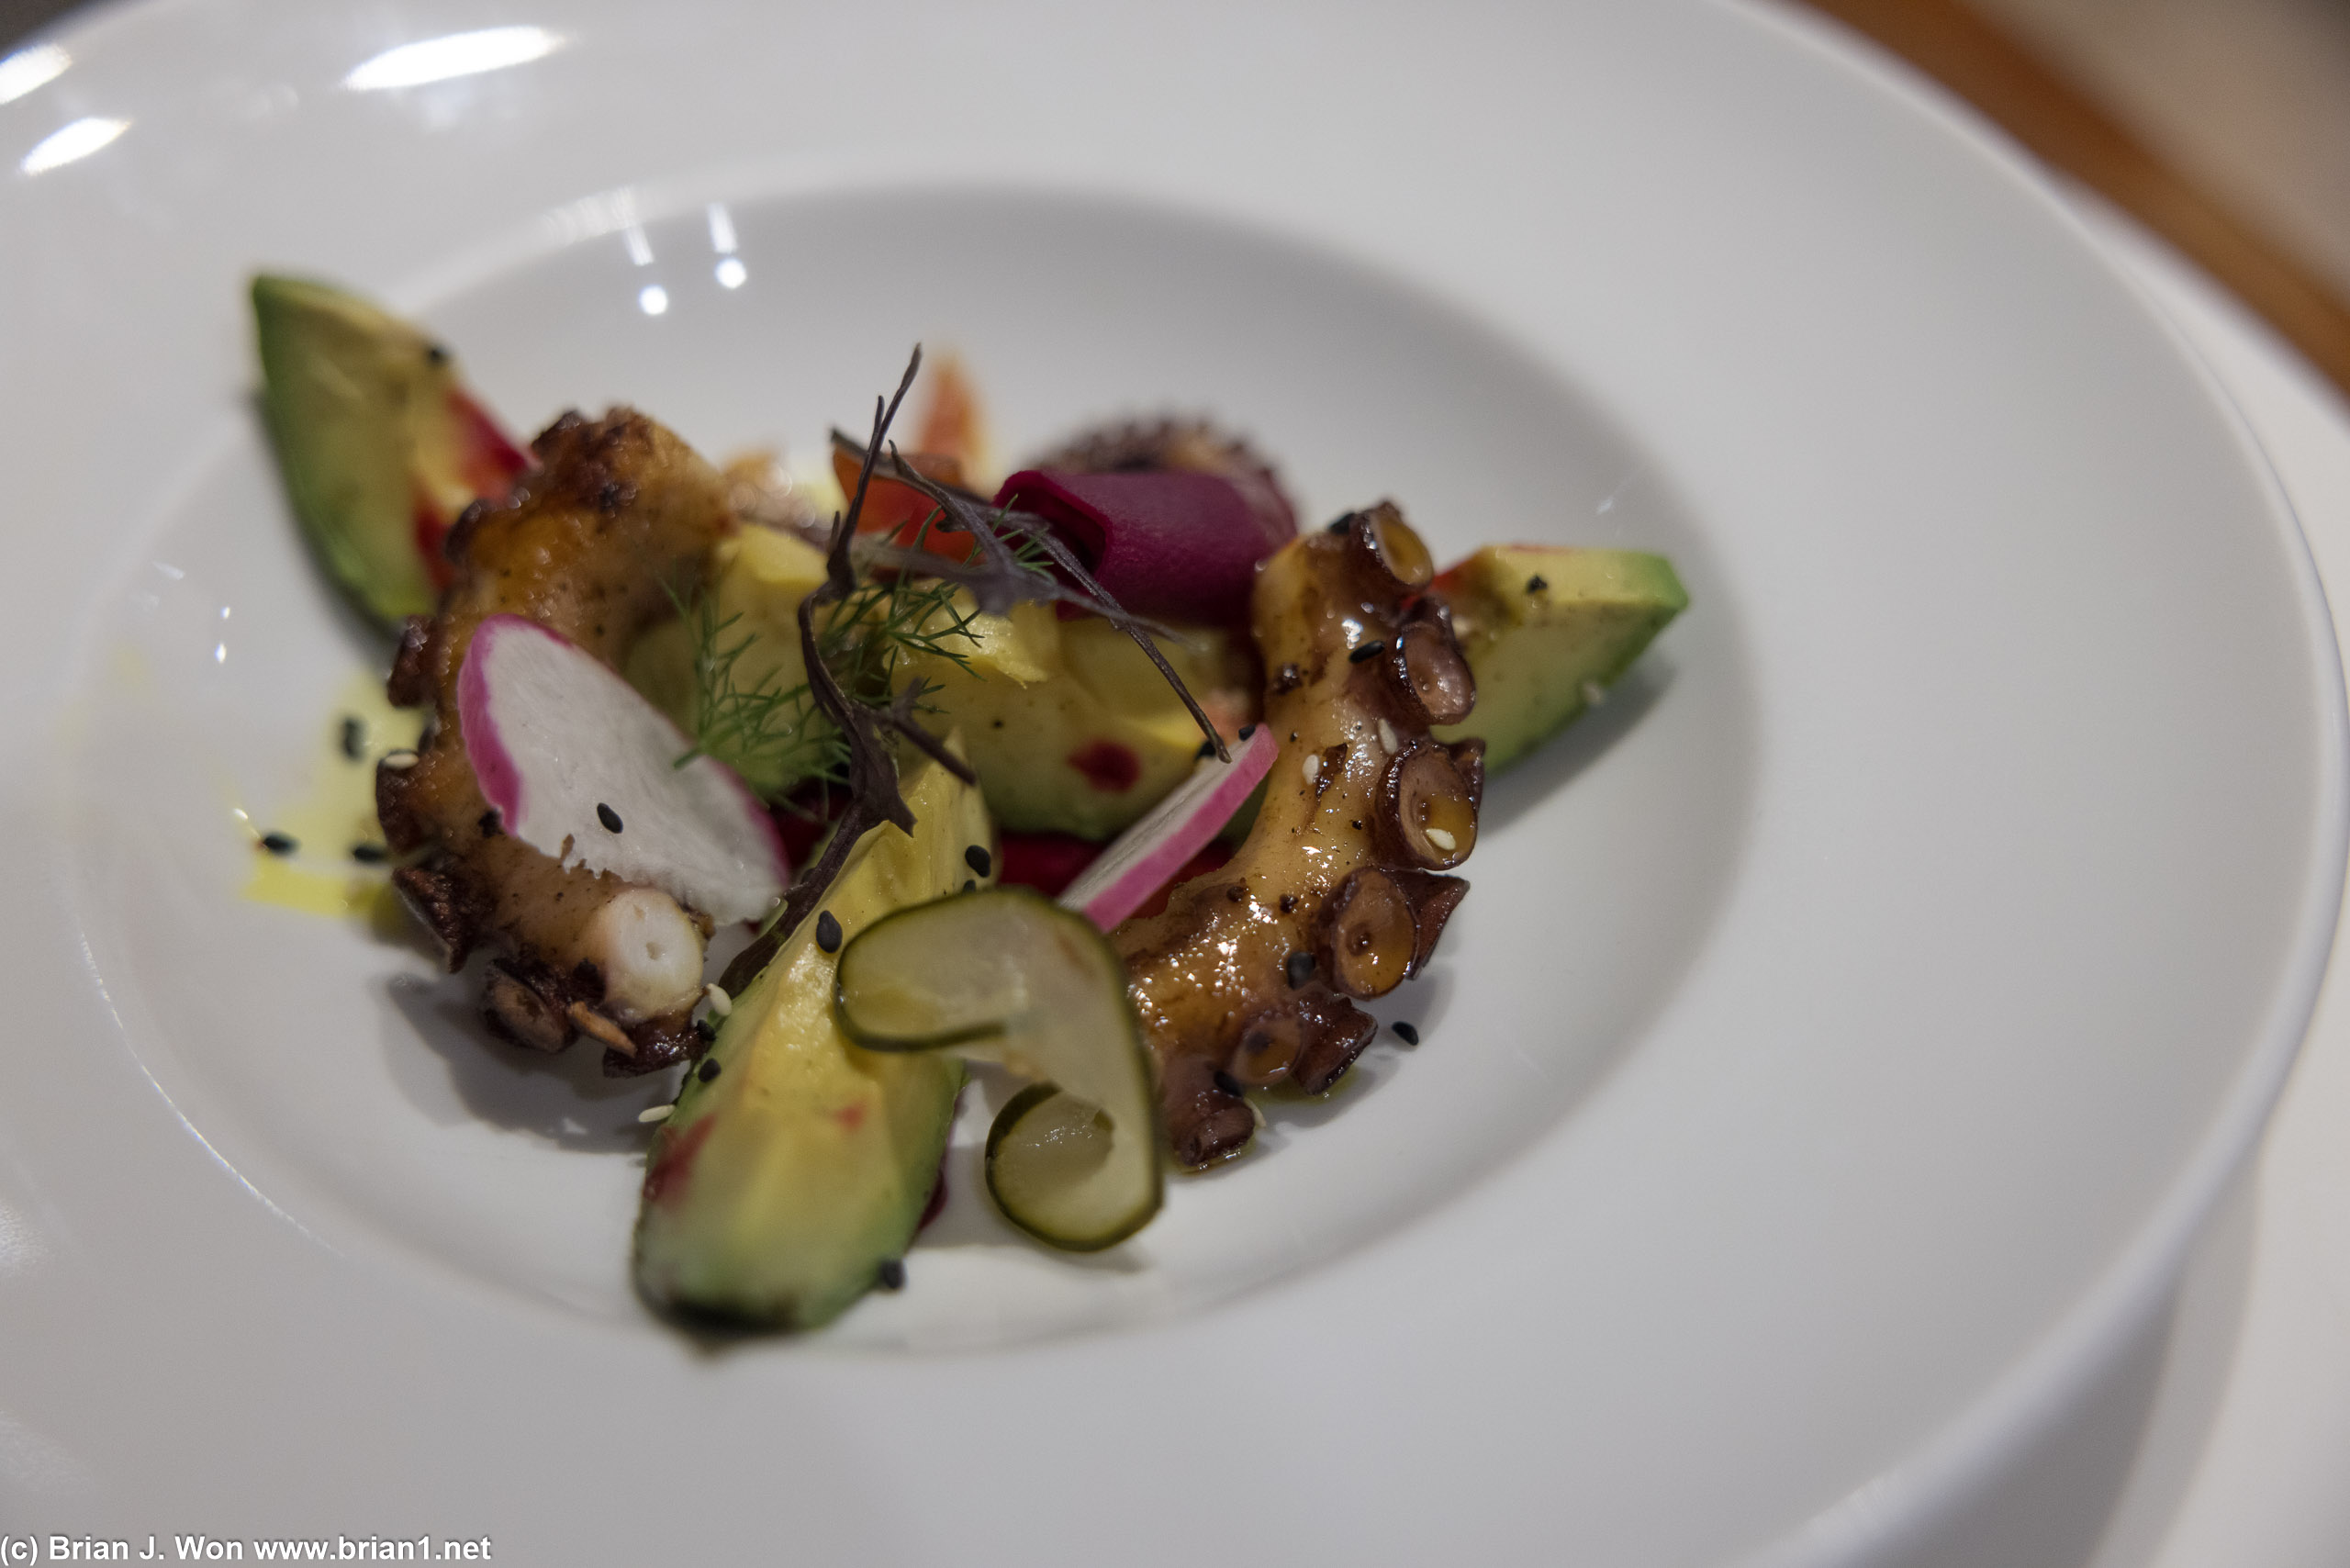 Seared octopus with avocado and tumeric.